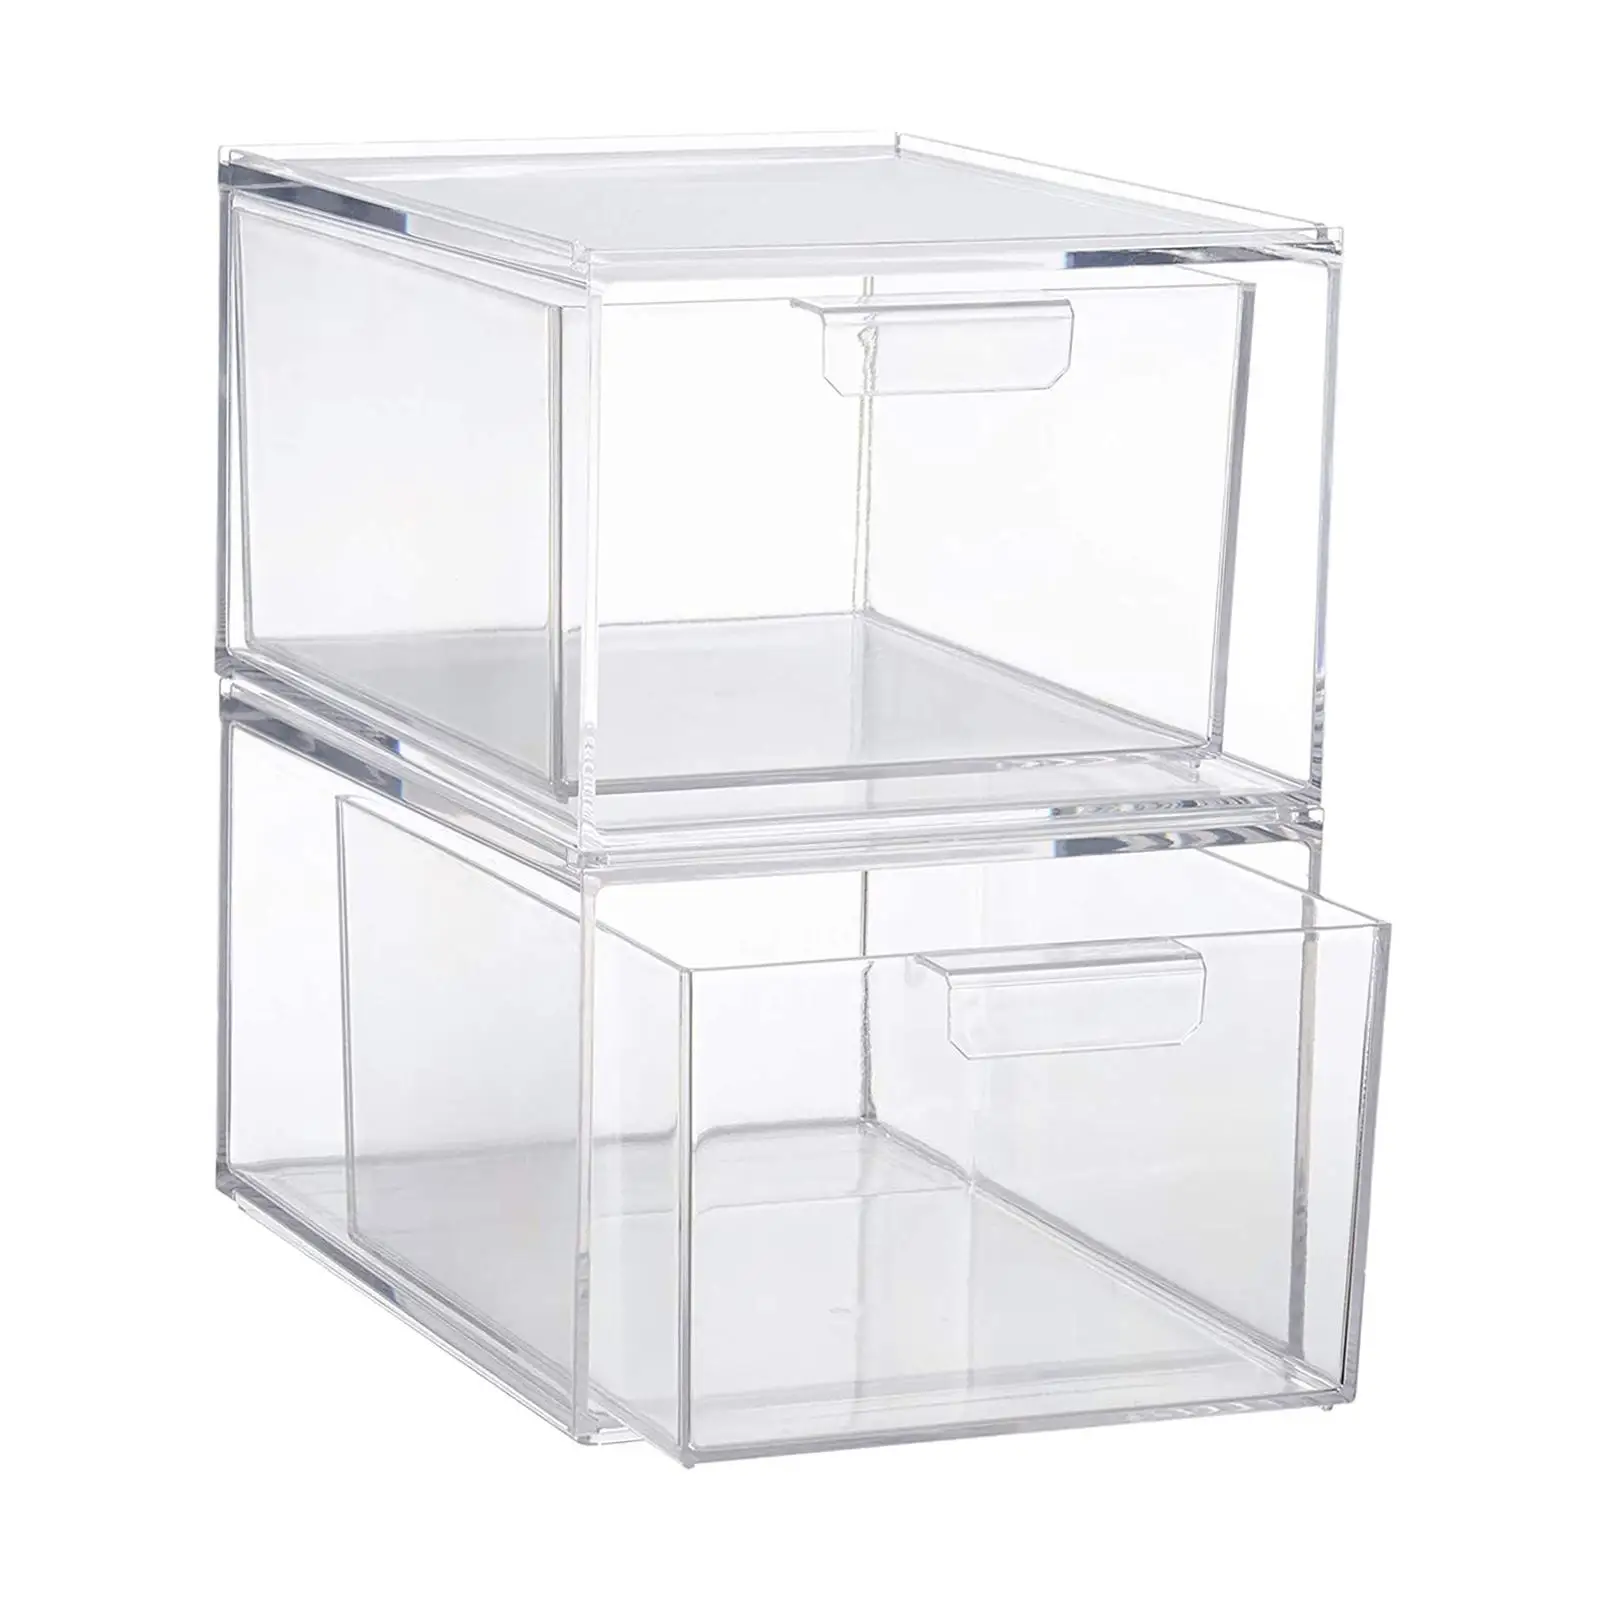 2 Pieces Acrylic Storage Container Home Organization Tabletop Clear Storage Box for Lipsticks Cosmetics Hair Brushes Jewelry